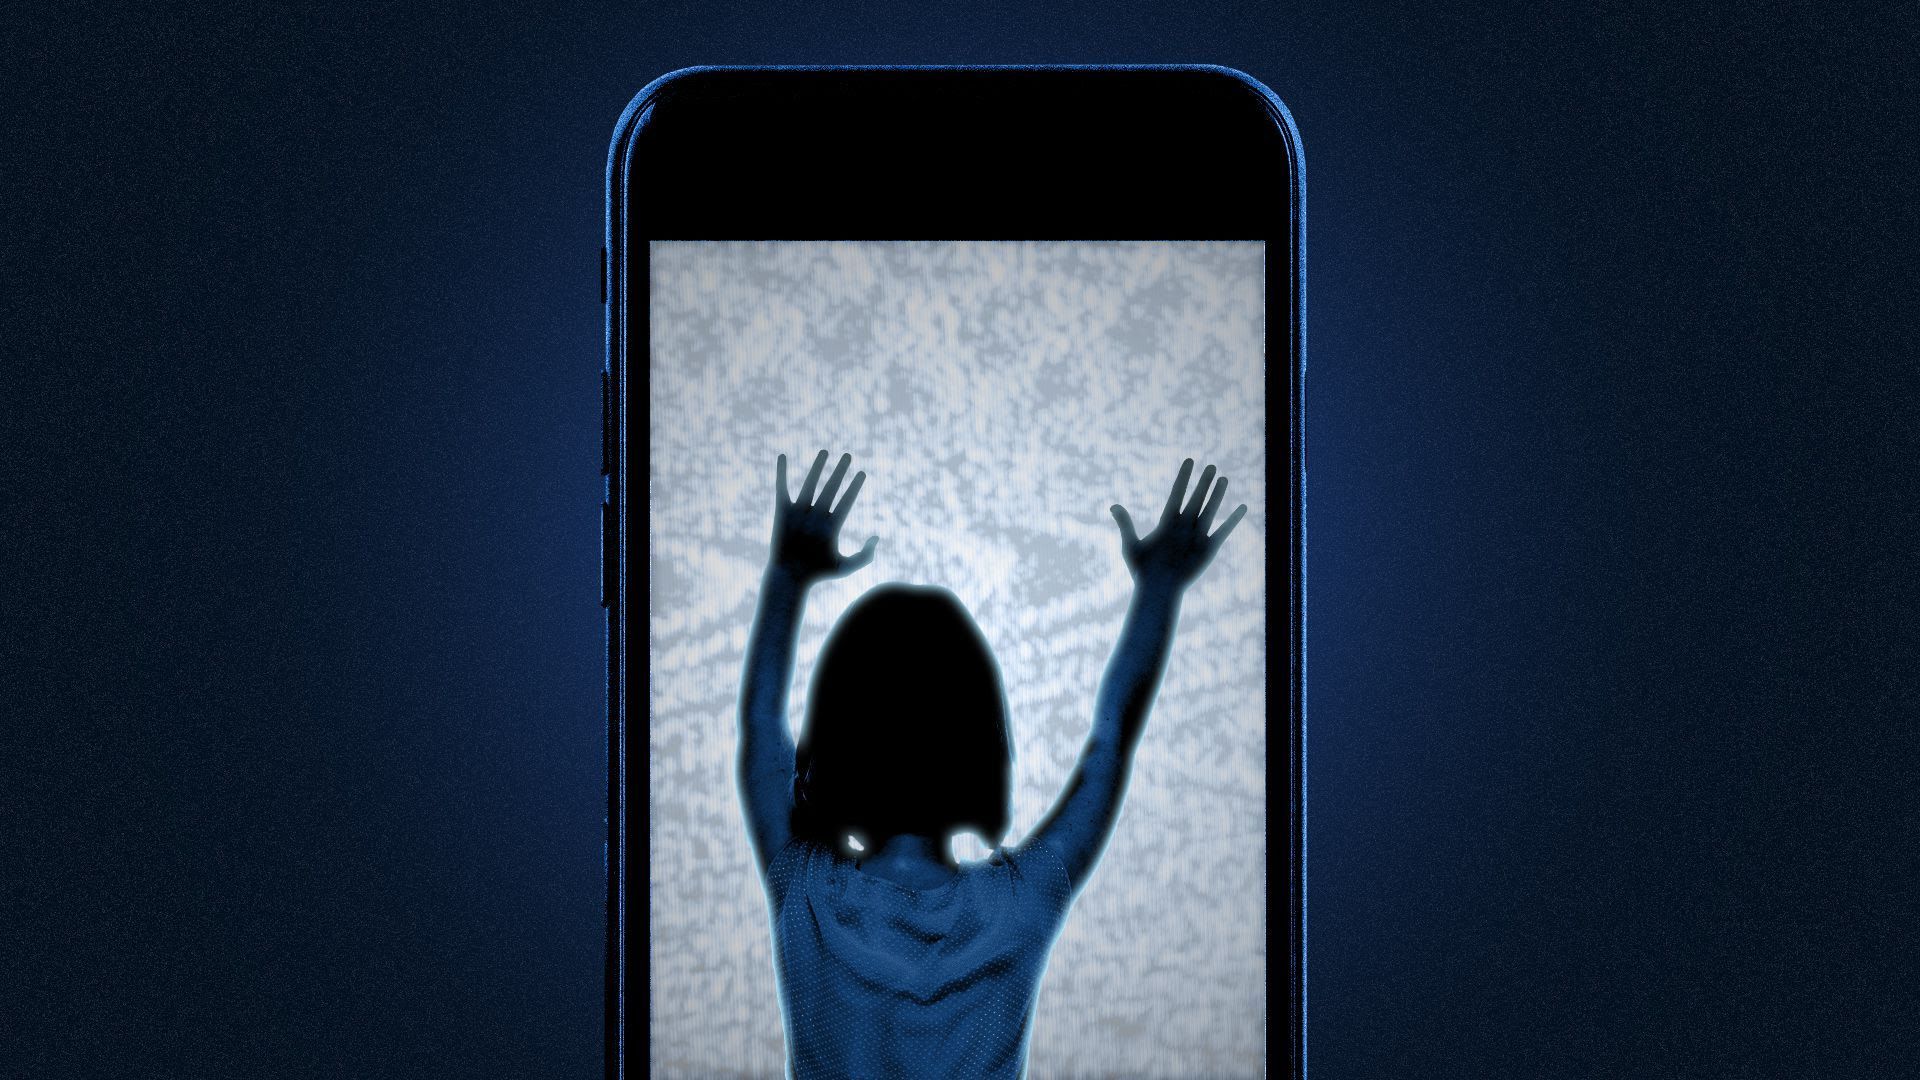 An illustration of a kid banging on the screen of a life-size smartphone